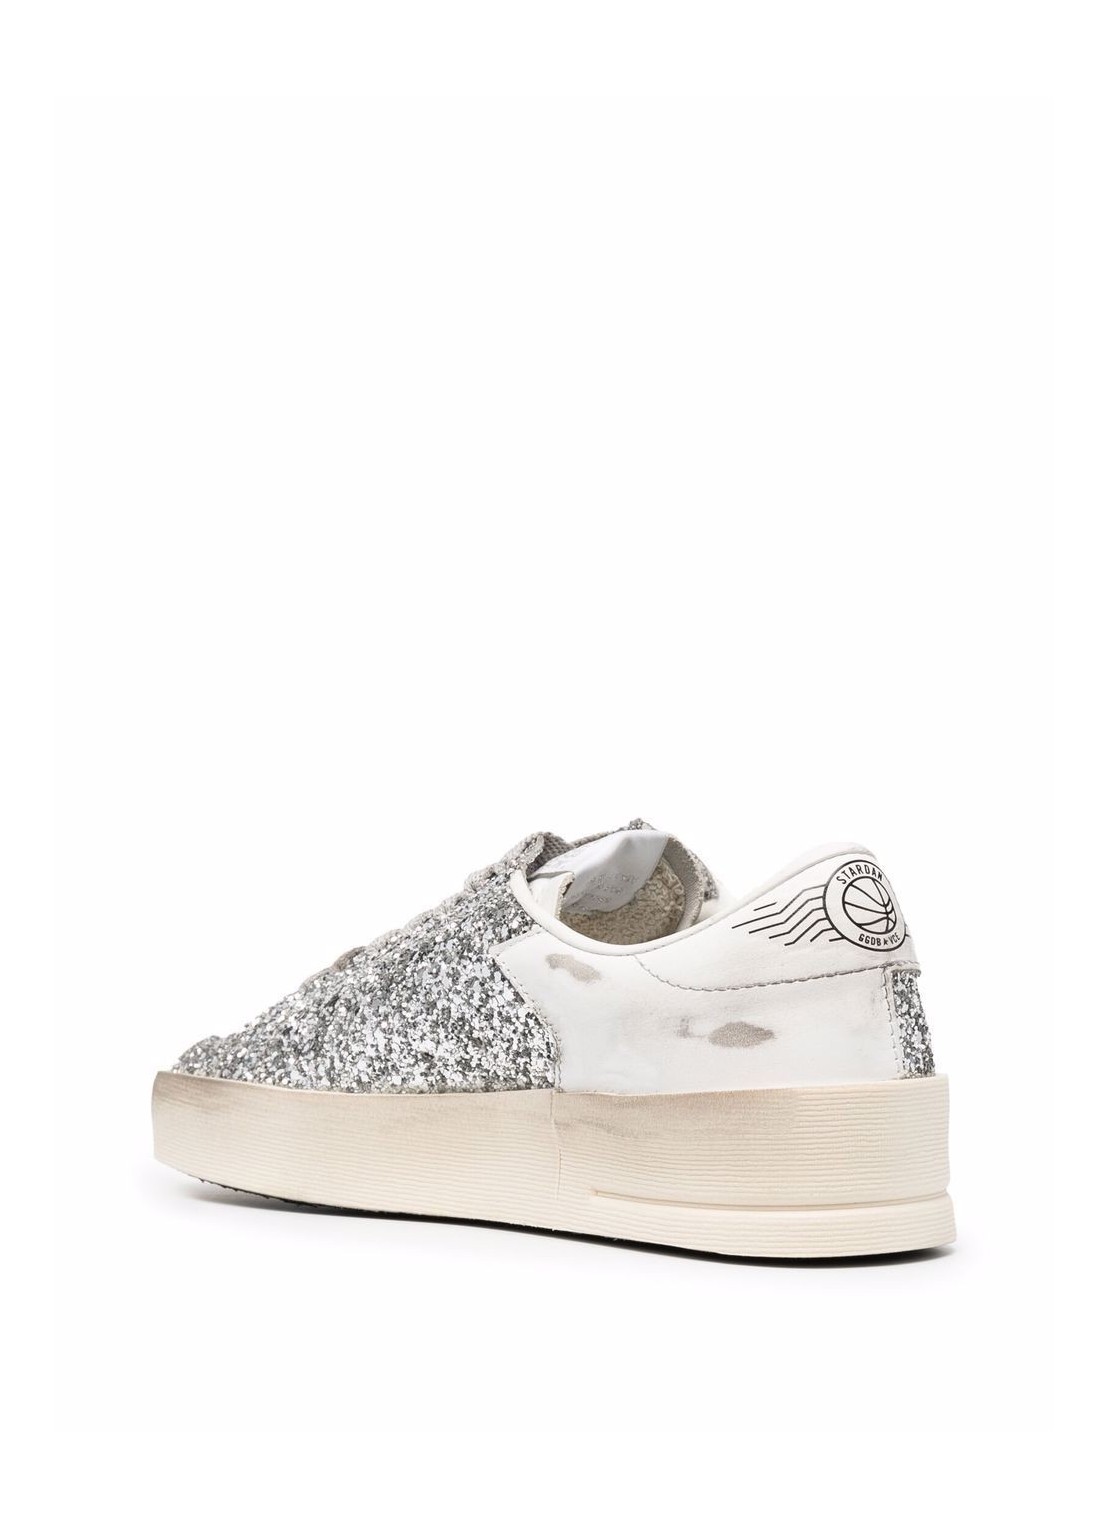 golden goose stardan leather and glitter - gwf00128f002185 80185 Talla 41